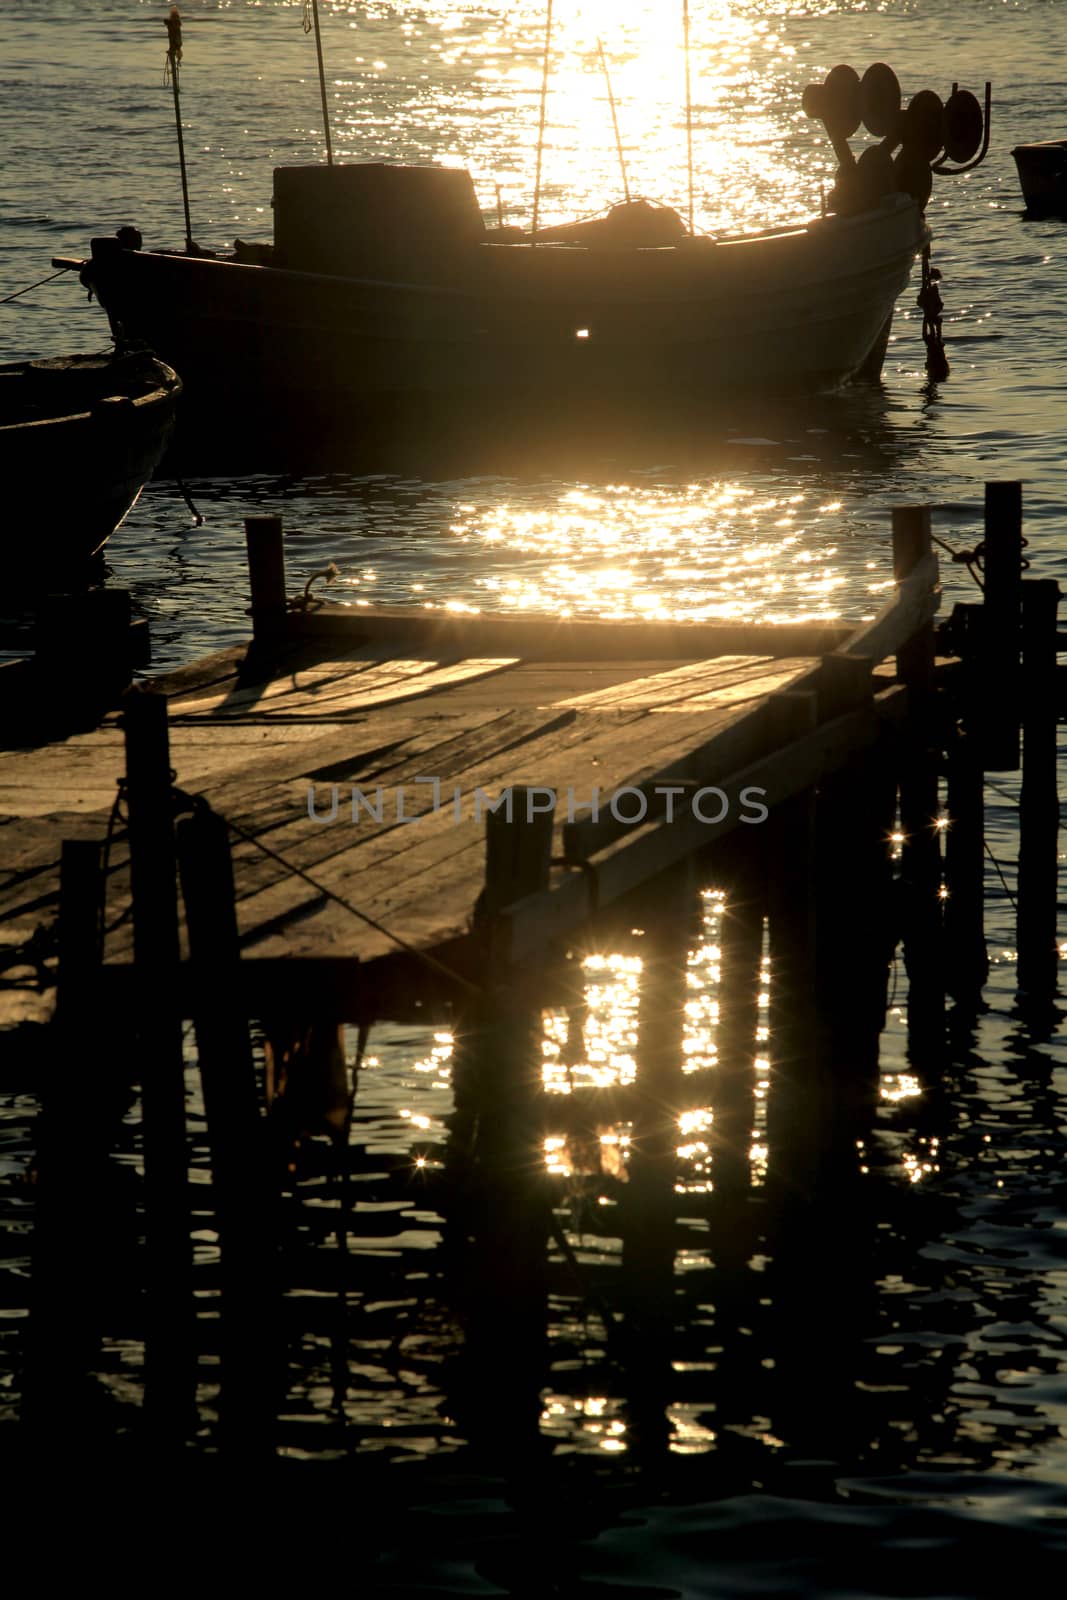 Wooden pier with boats at sunset